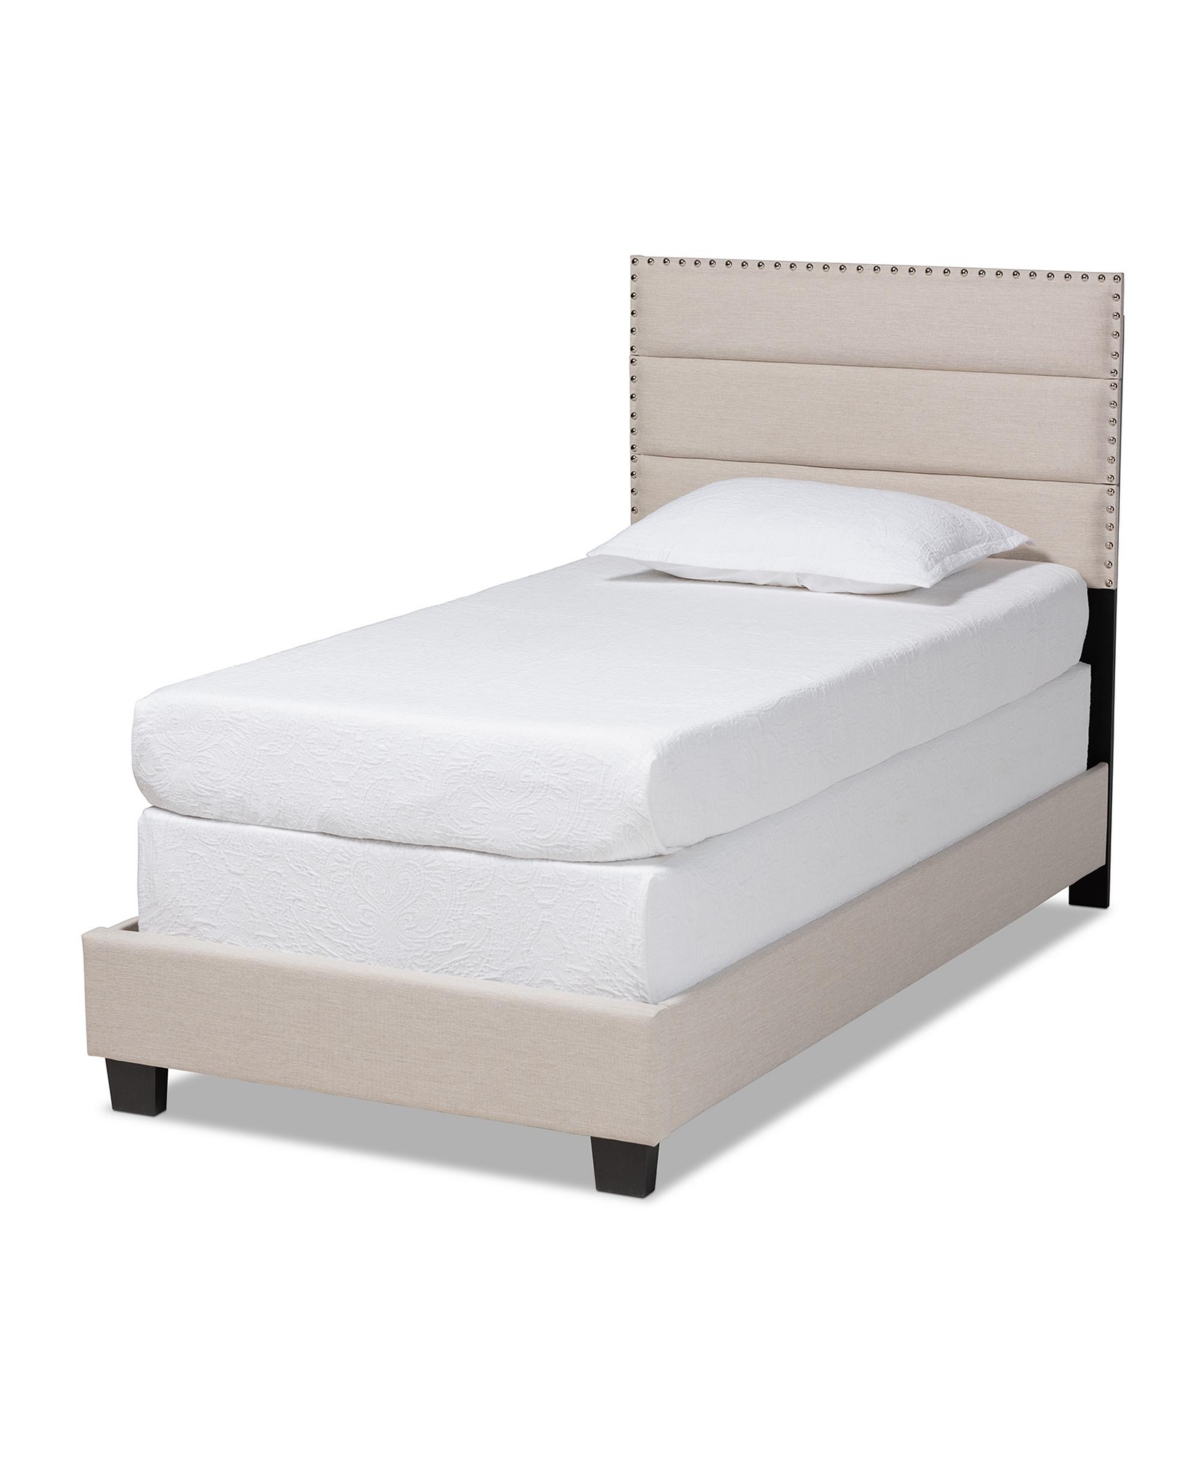 10426671 Ansa Upholstered Bed - Twin sku 10426671